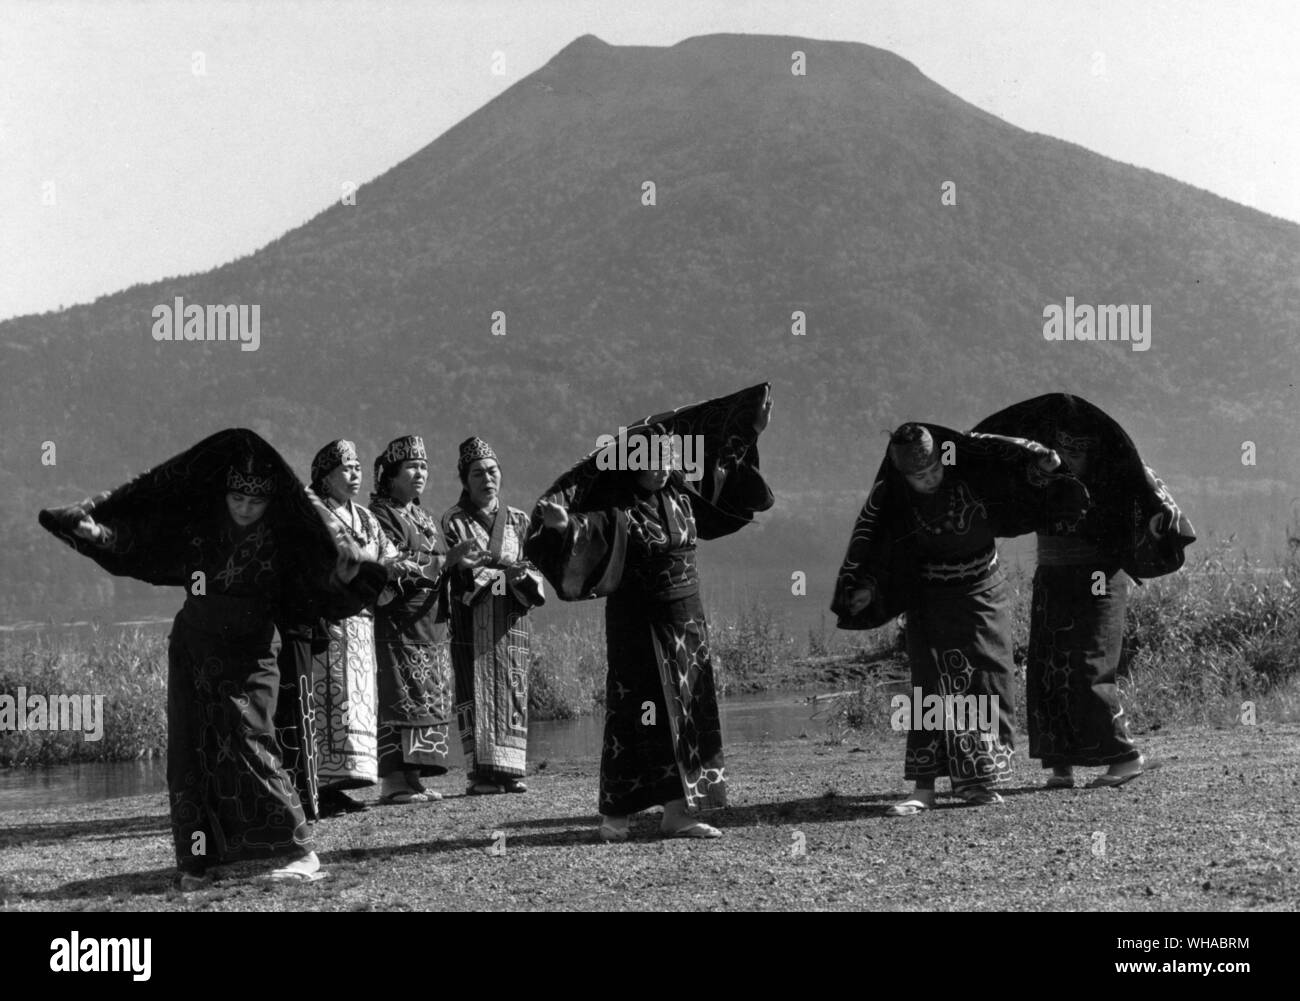 Ainu women dance the steps of the crane dance on the shores of Lake Akan, mimicking the cranes and weaving a charm to keep bears and other frightening creatures away Stock Photo